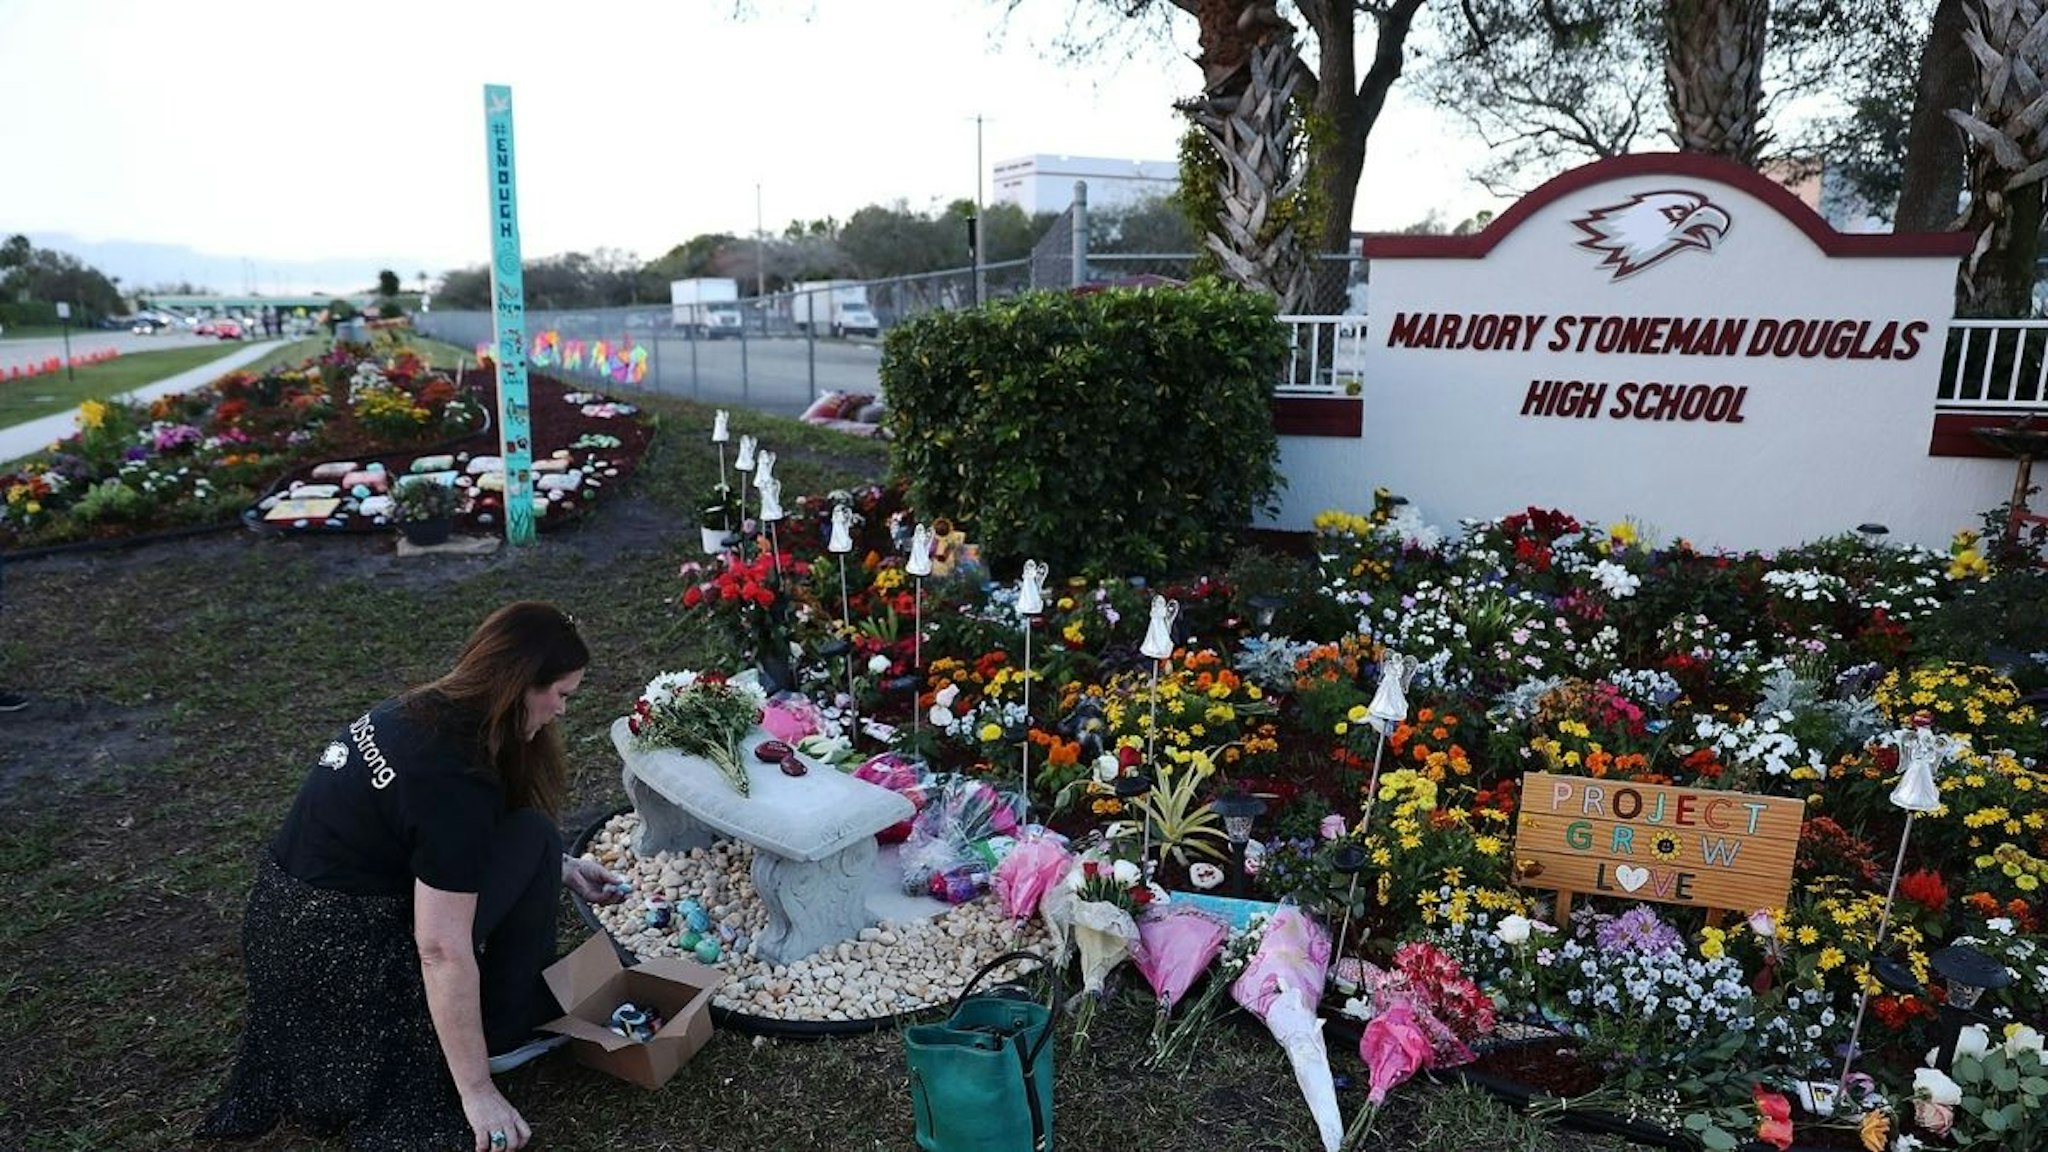 Suzanne Devine Clark visits a memorial setup at Marjory Stoneman Douglas High School for those killed during a mass shooting on February 14, 2019 in Parkland, Florida.